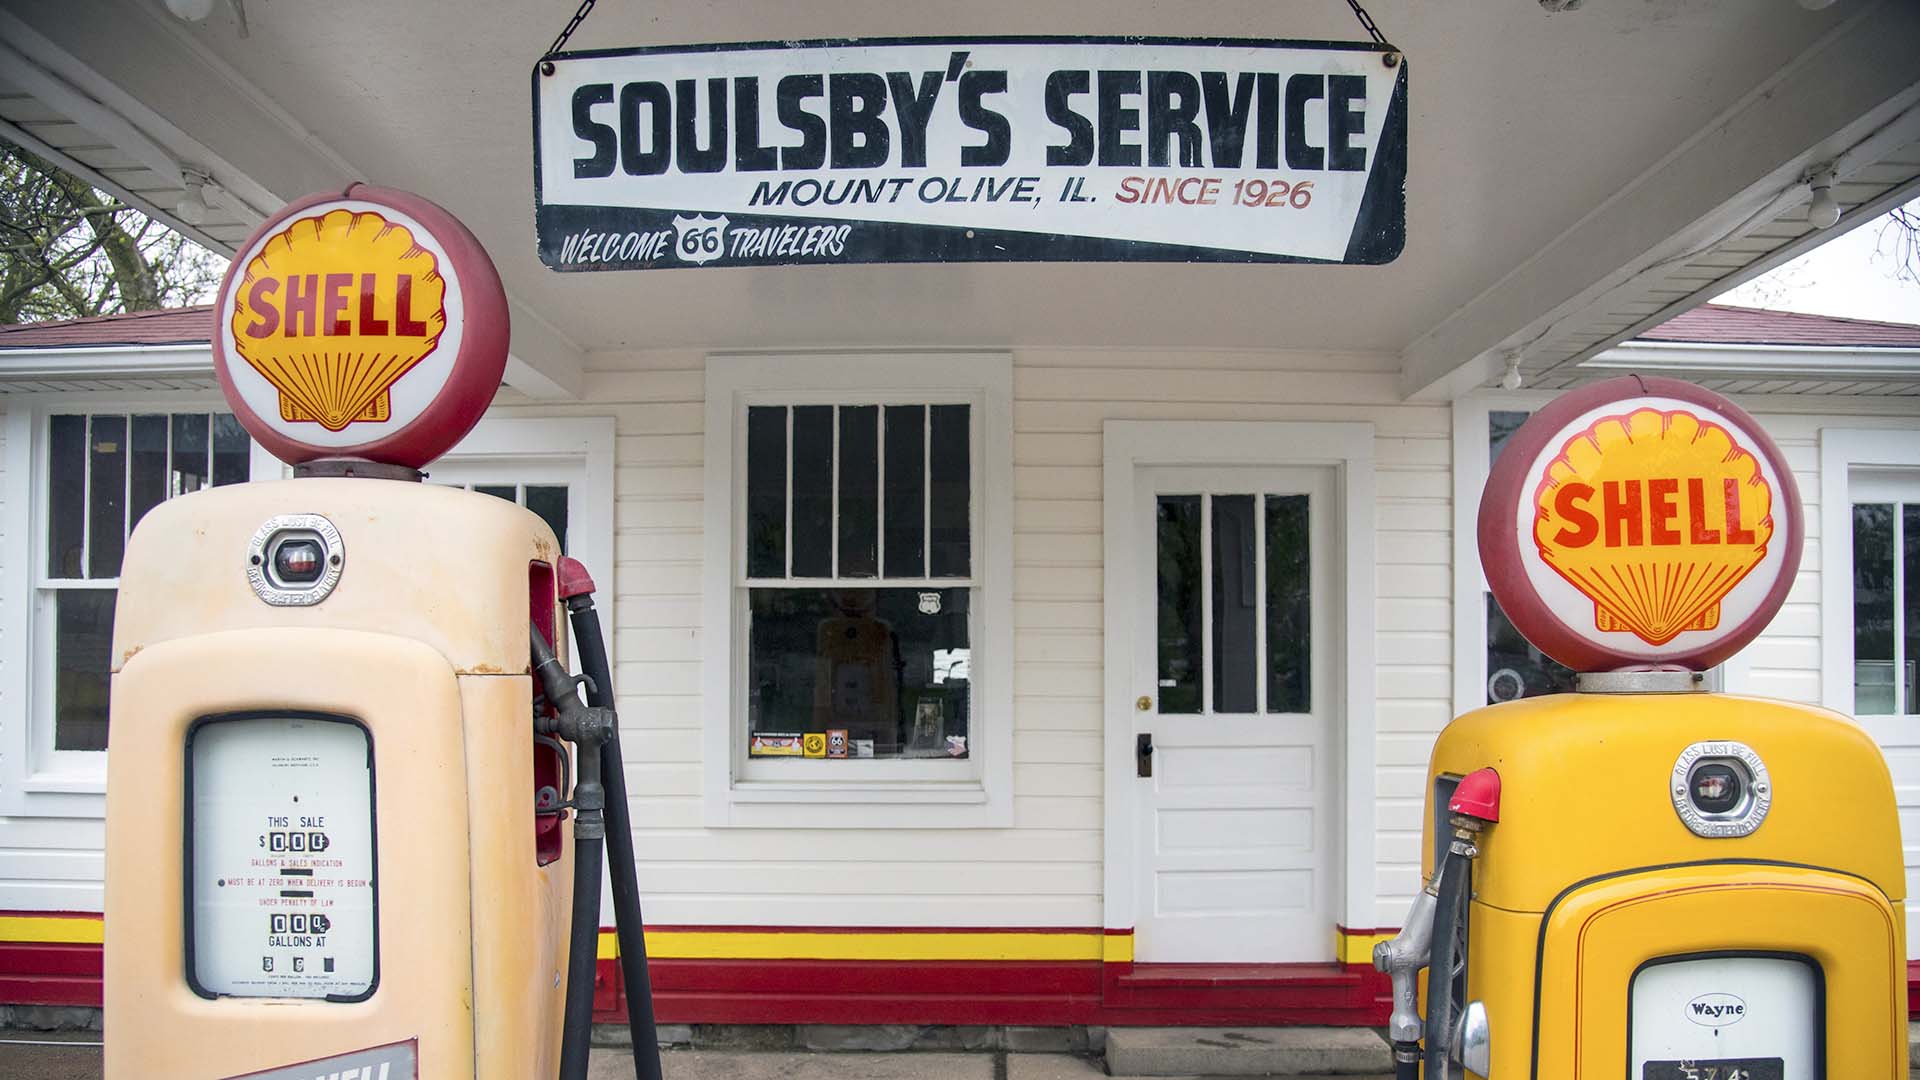 Henry Soulsby built his service station in Mount Olive, Illinois, in 1926.